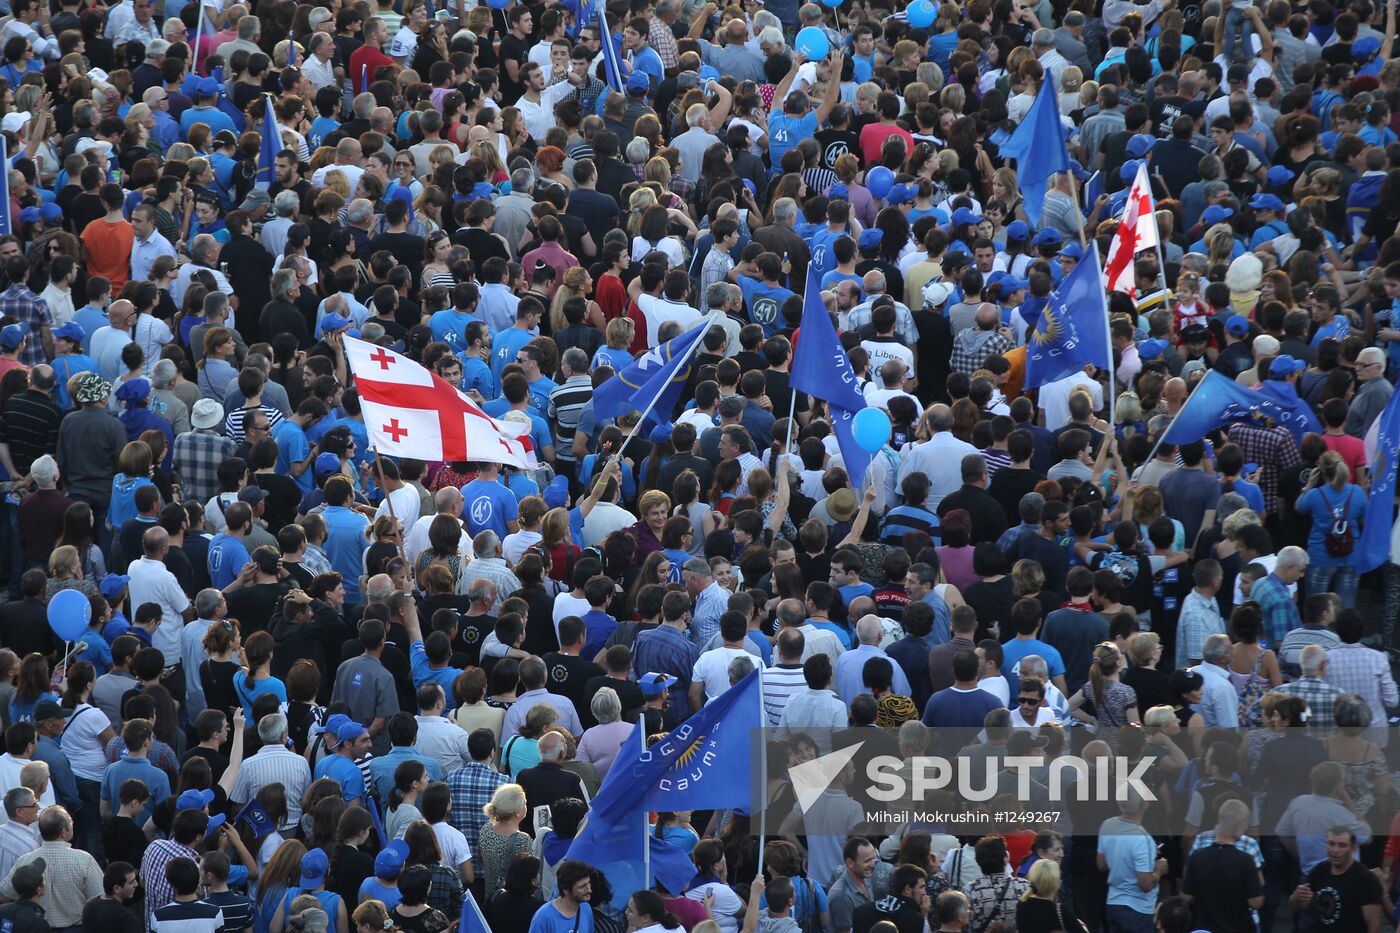 Georgia Dream opposition coalition rally in Tbilisi